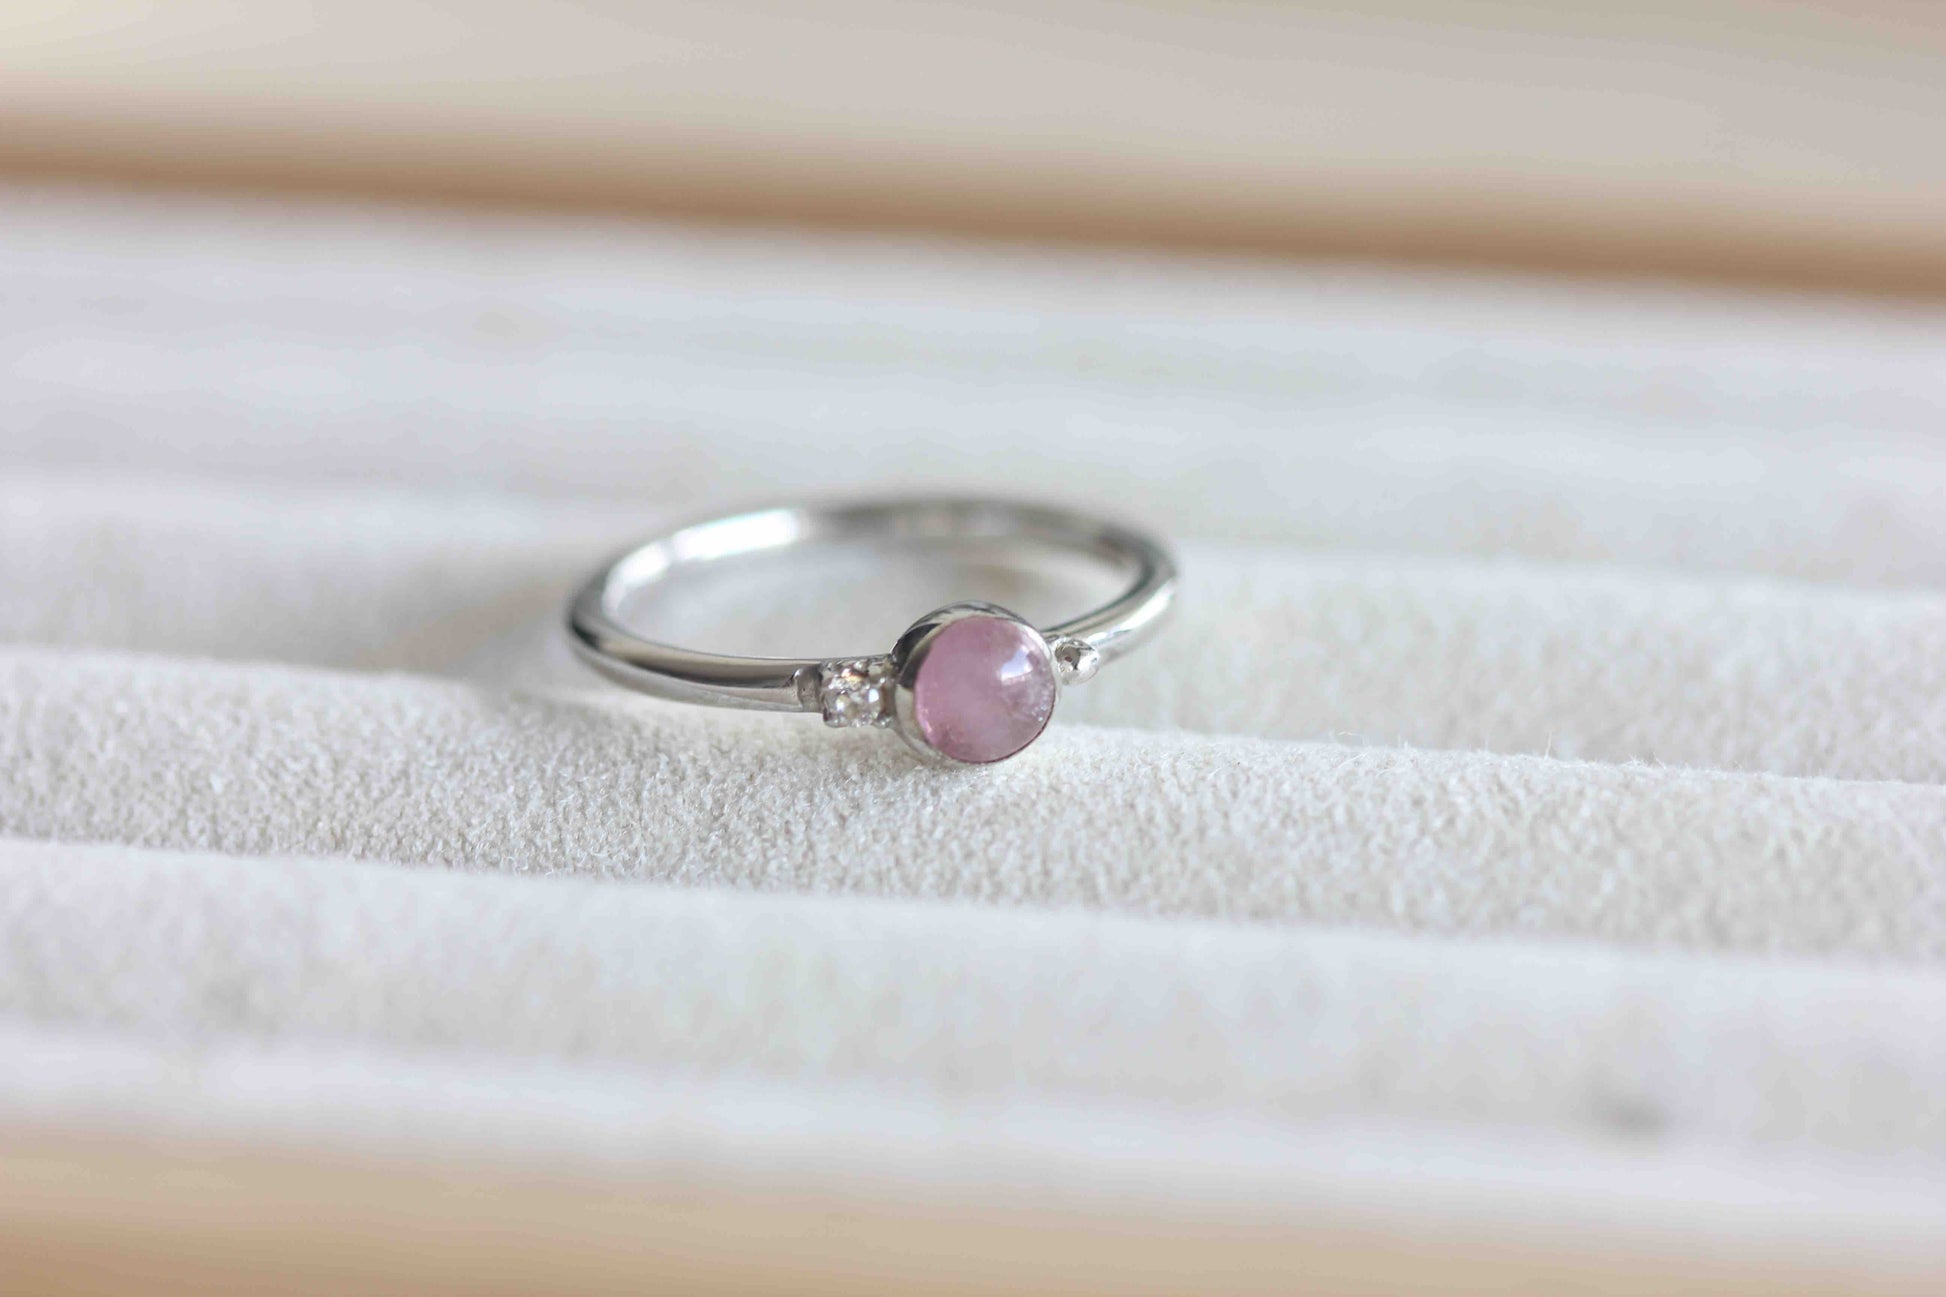 Tourmaline Silver Ring. Sterling Silver Jewelry. Tourmaline Jewelry. Watermelon Tourmaline.